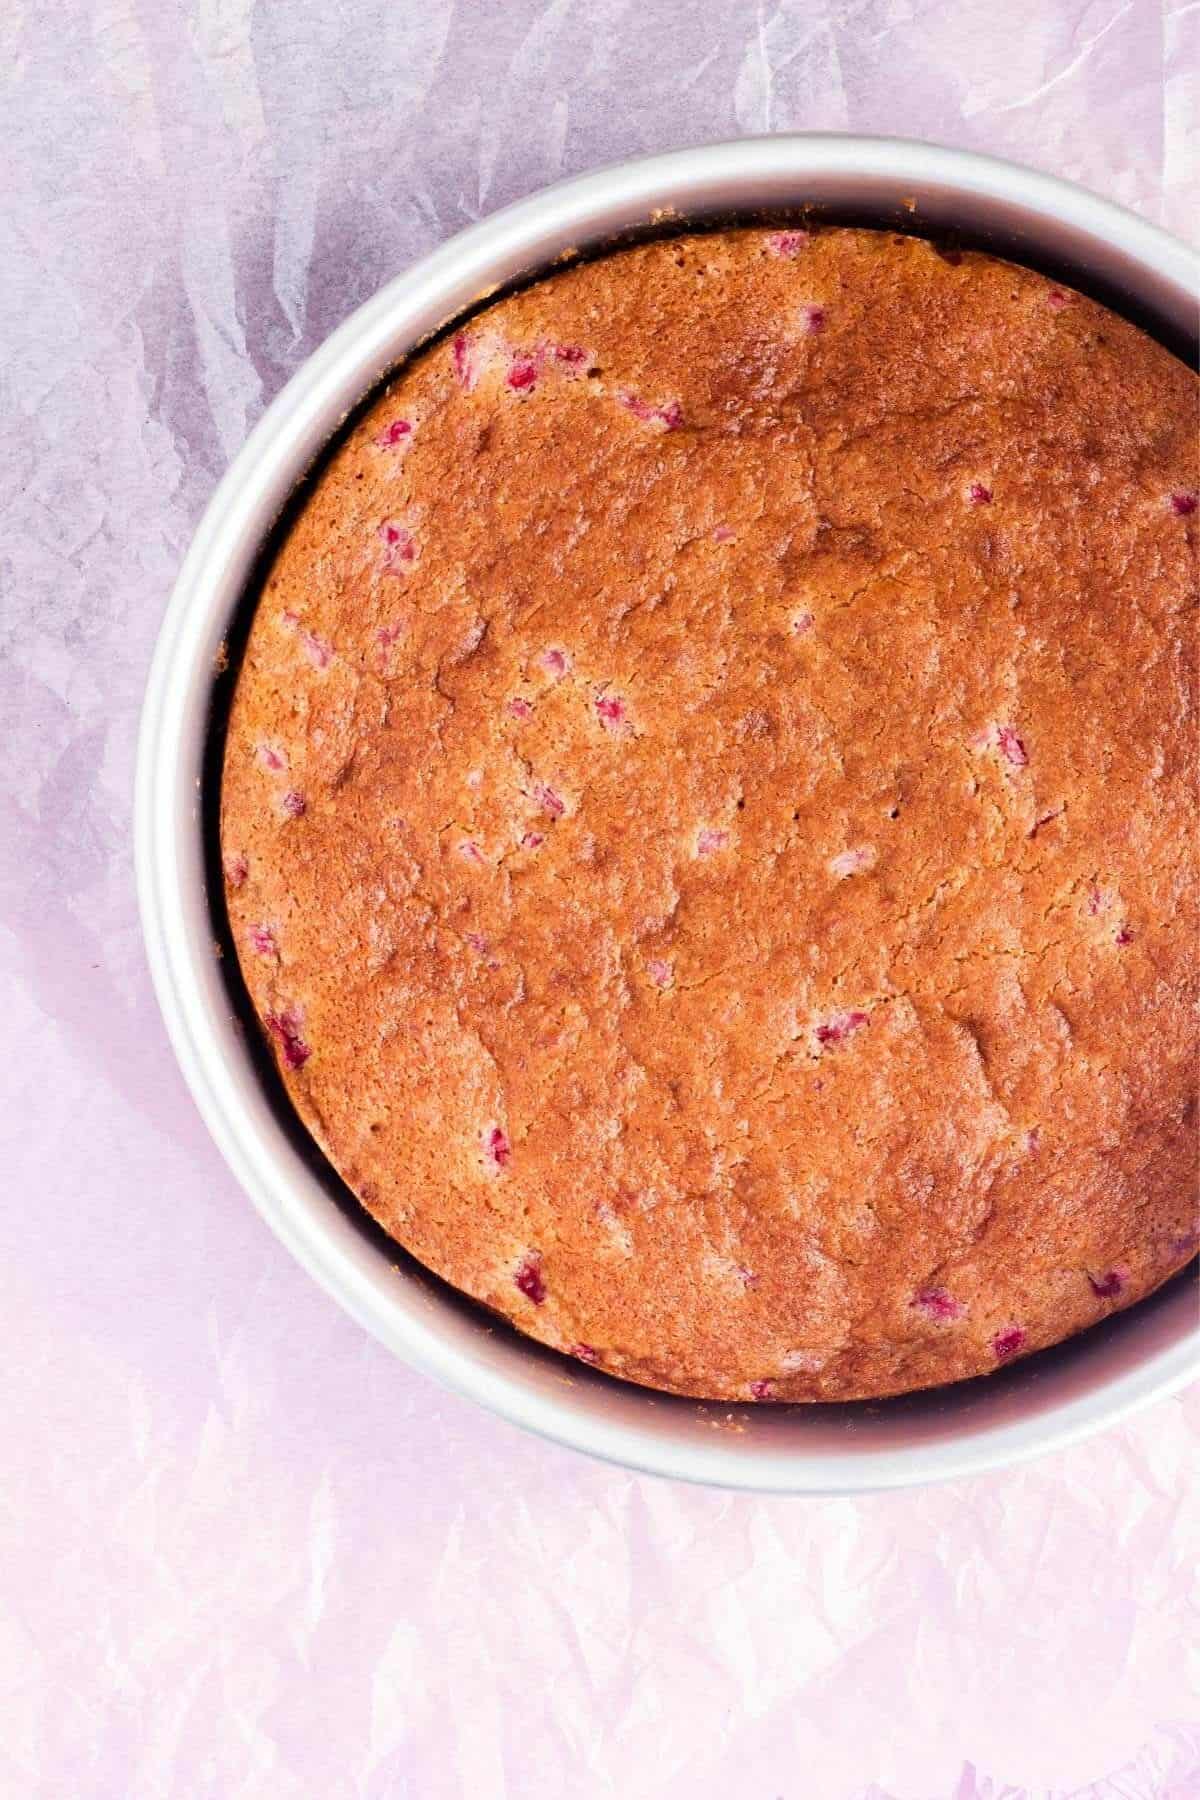 Cooked strawberry cake in pan.